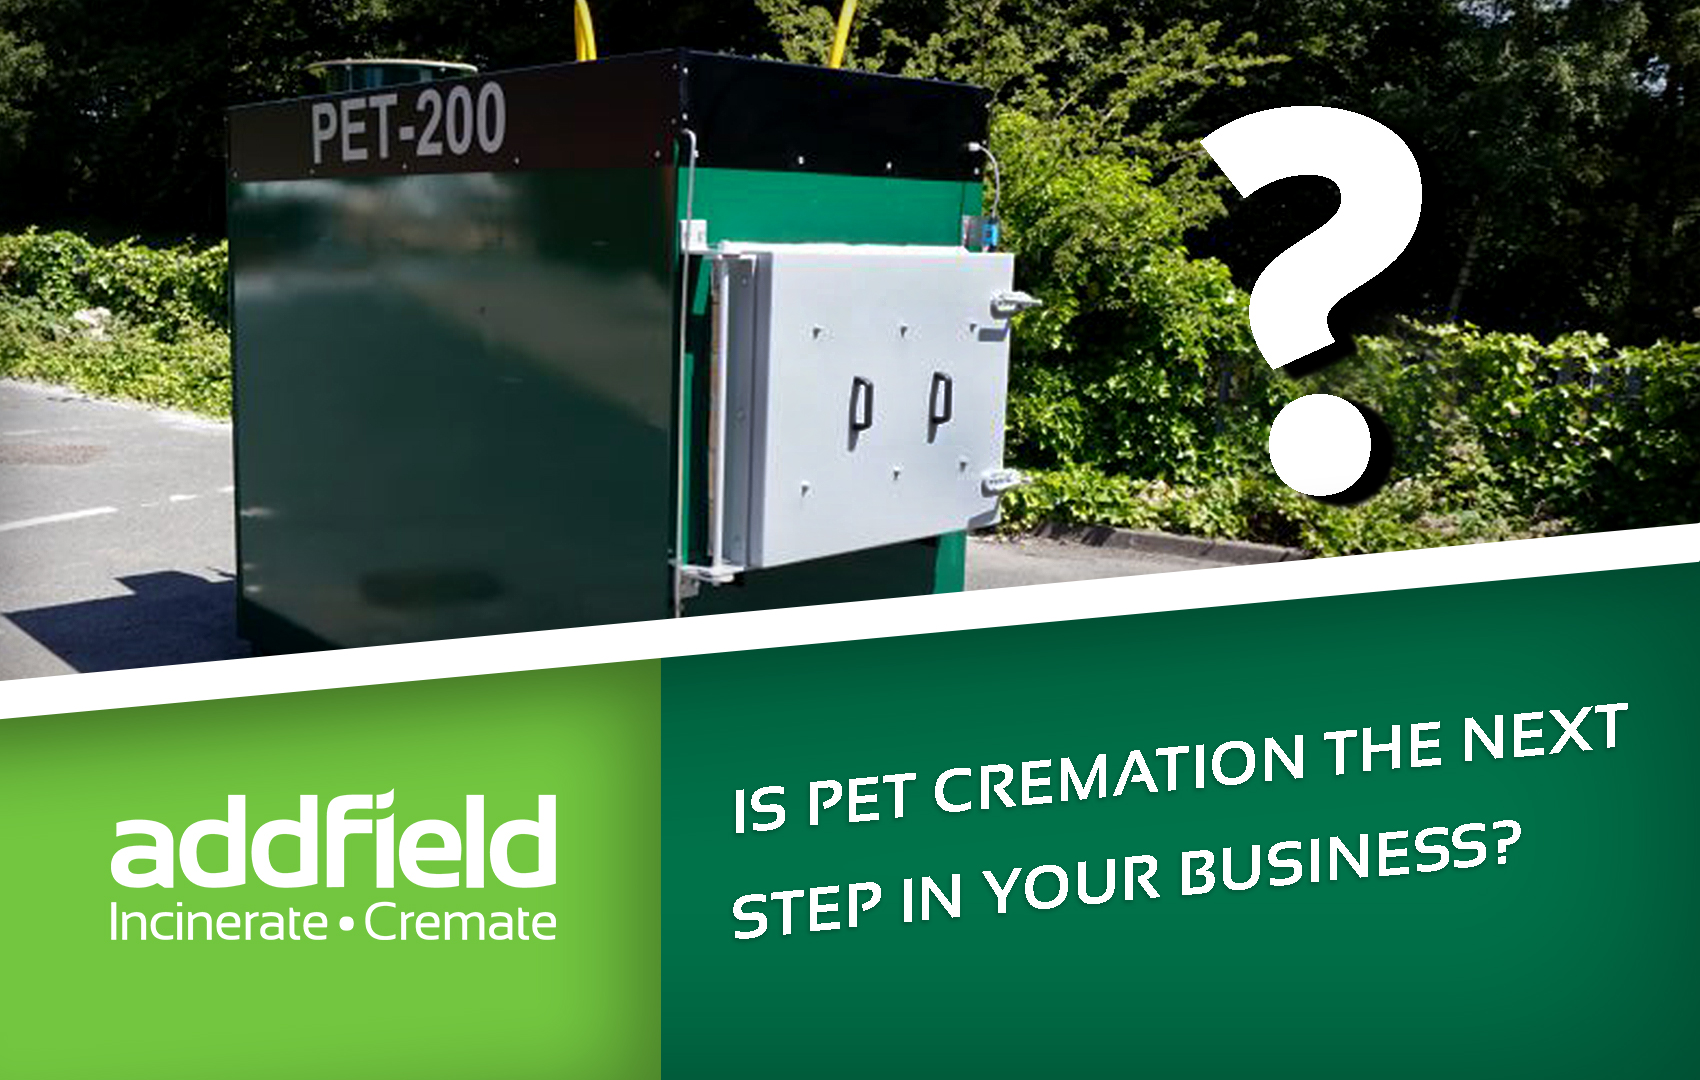 Pet cremation machine with question mark